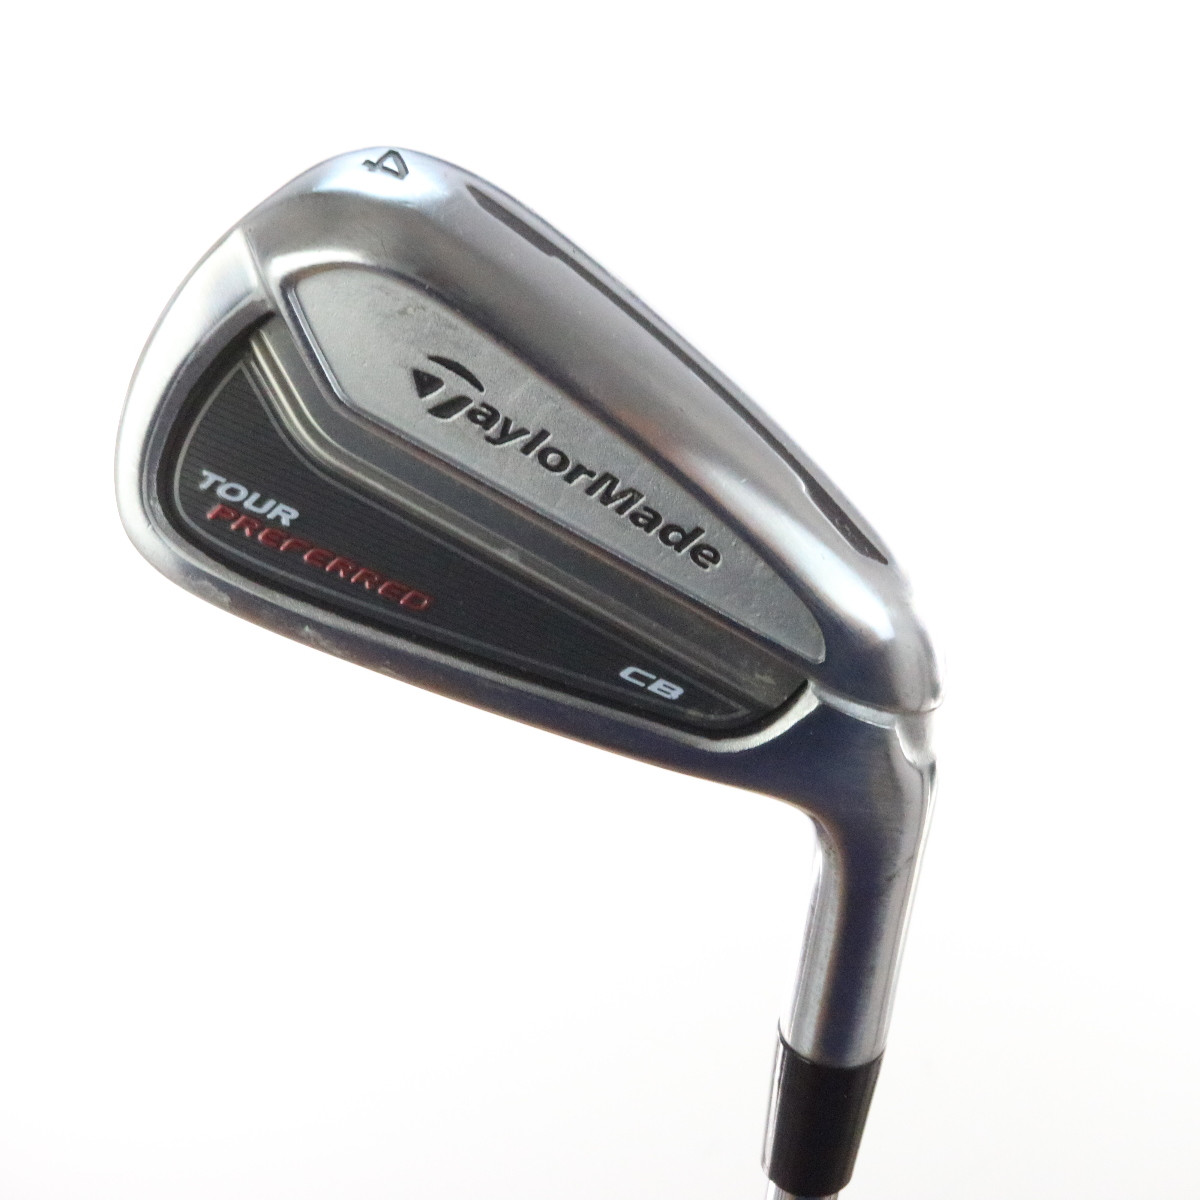 taylormade tour preferred cb irons tip size